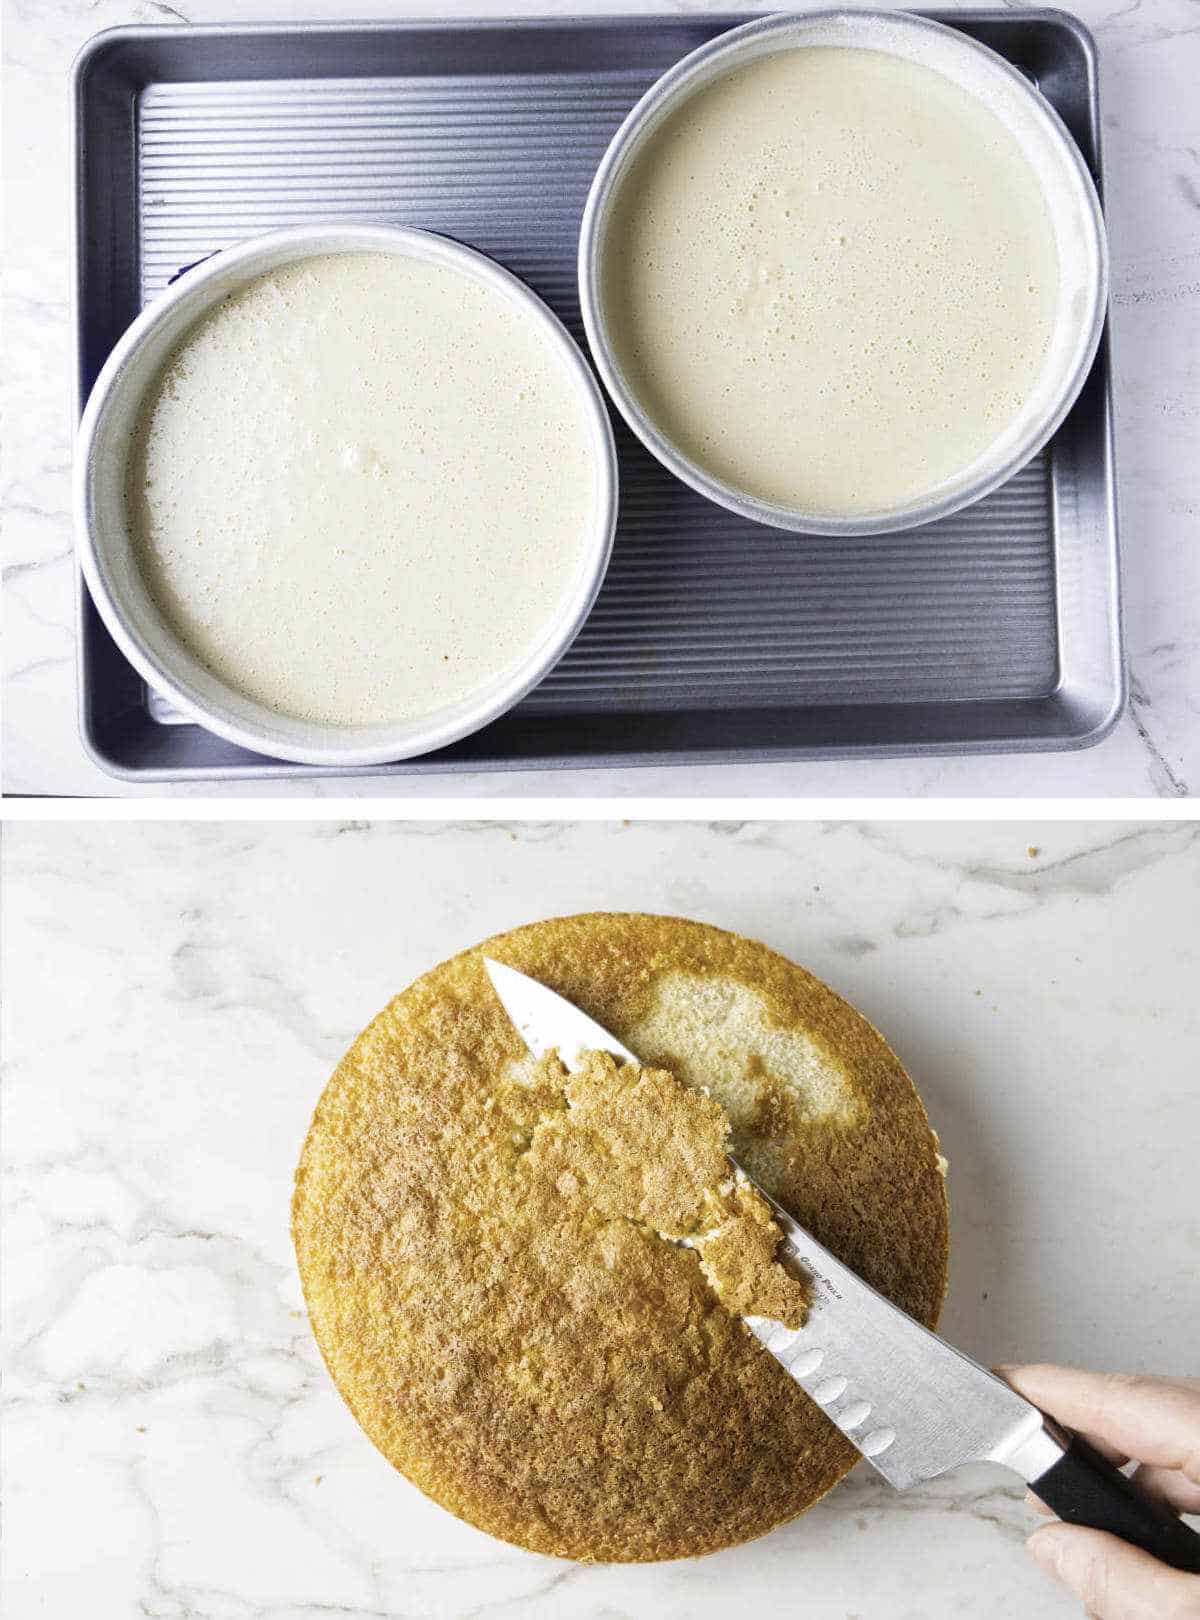 cake batter in two pans, and a sharp knife being used to shave the top off a baked cake so that it's level.